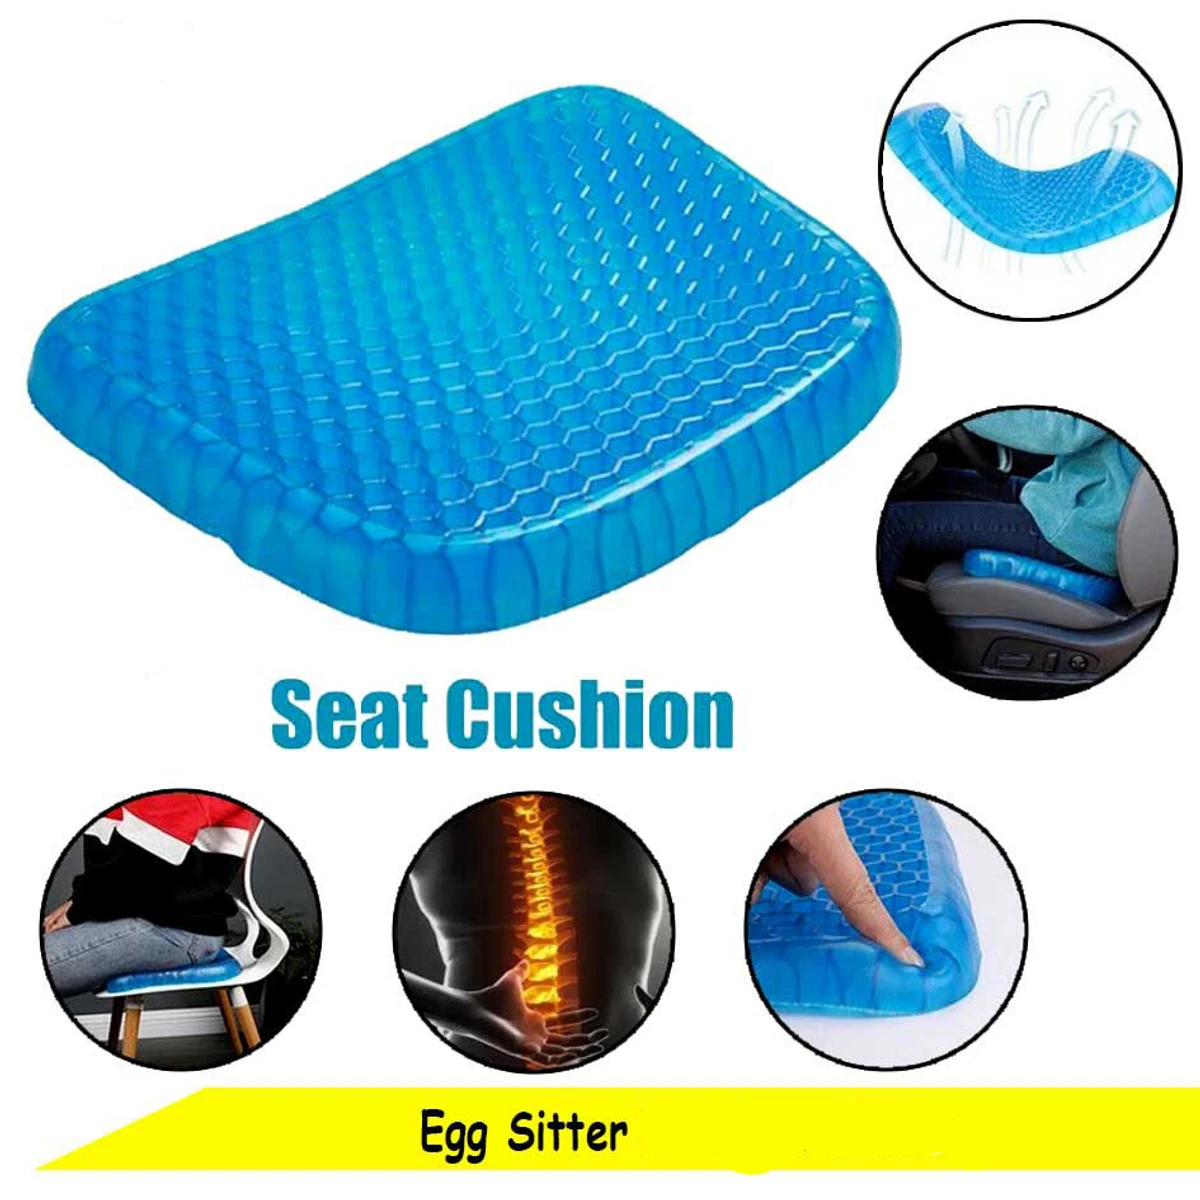 1 Pcs Silicone Comfortable Egg Sitter Seat Cushion for Office Car Home Chair